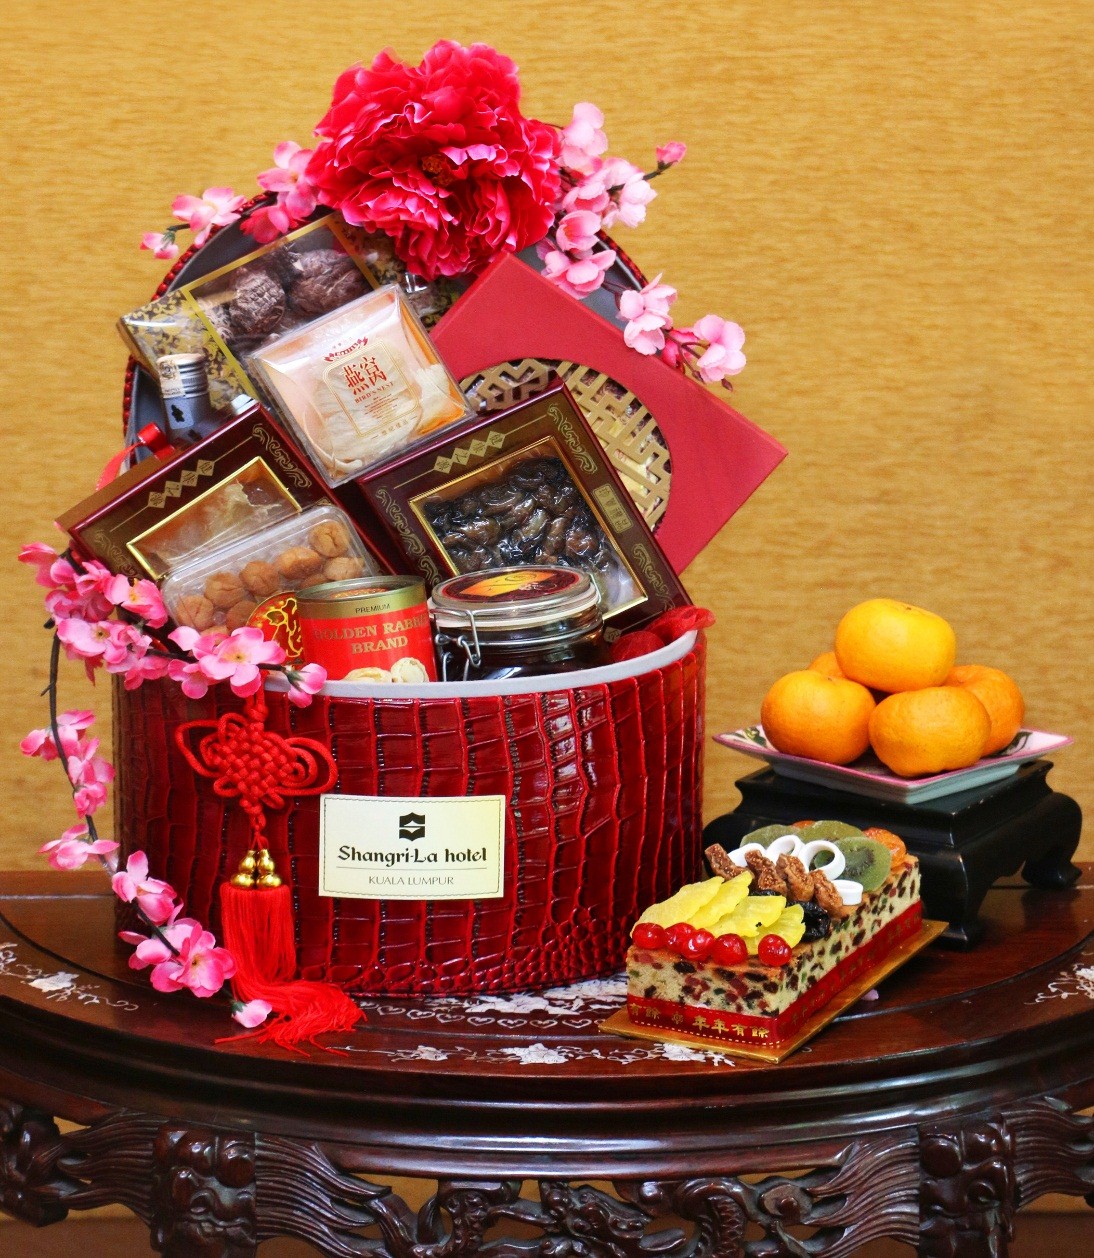 LUXURIOUS HAMPERS AND NINKO BY SHANGRI-LA HOTEL, KUALA LUMPUR FOR CHINESE NEW YEAR1094 x 1258